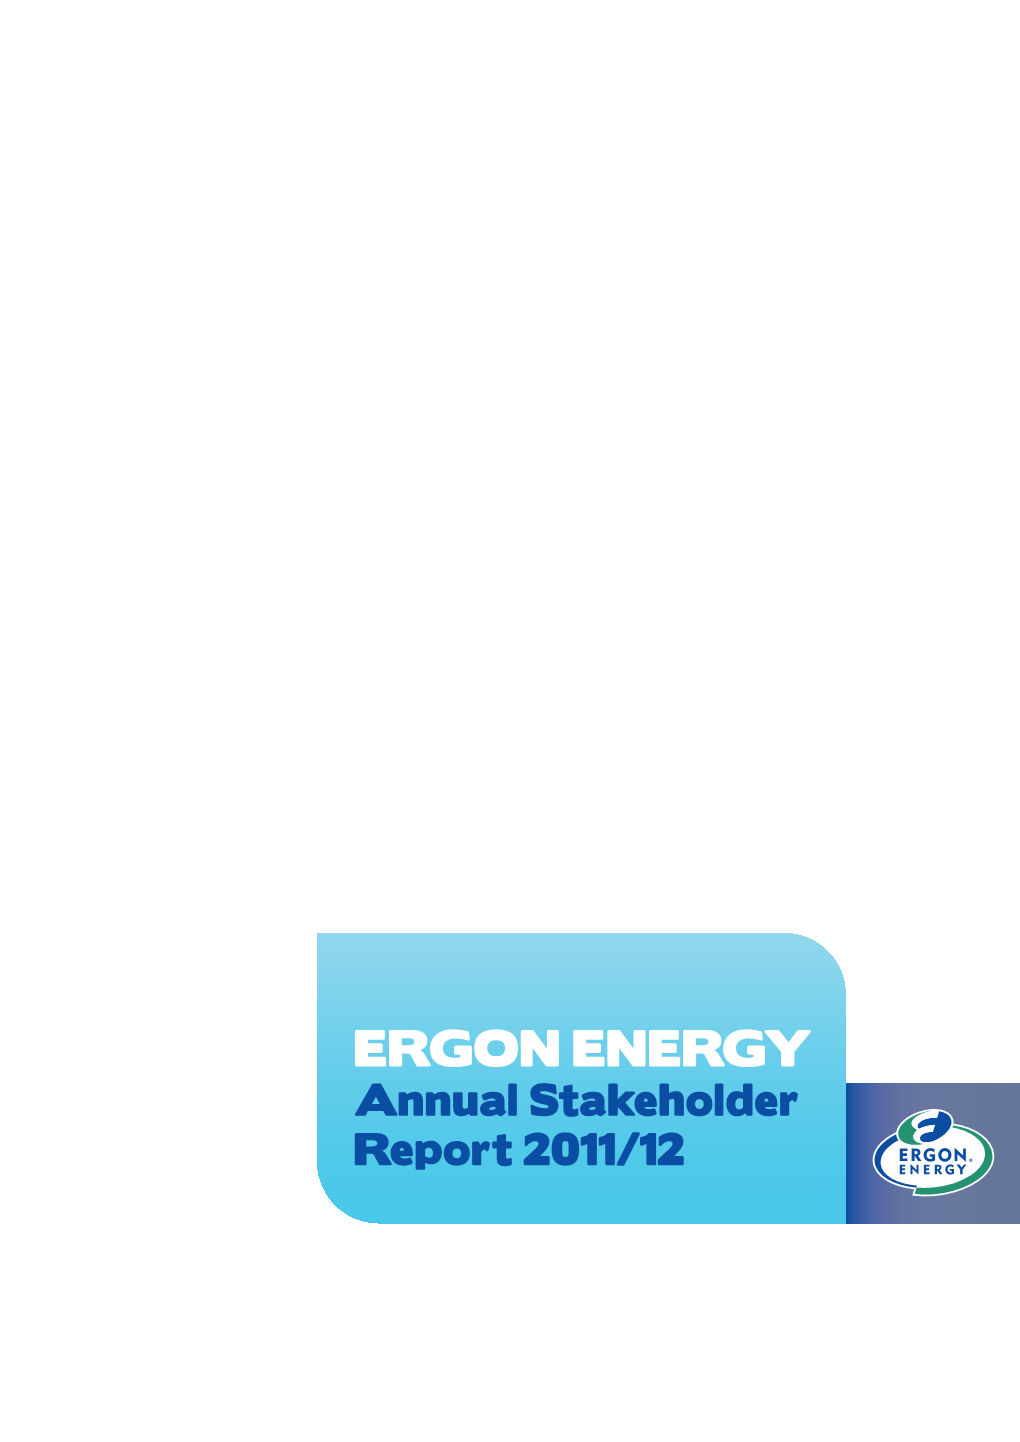 ERGON ENERGY Annual Stakeholder Report 2011/12 CONTENTS